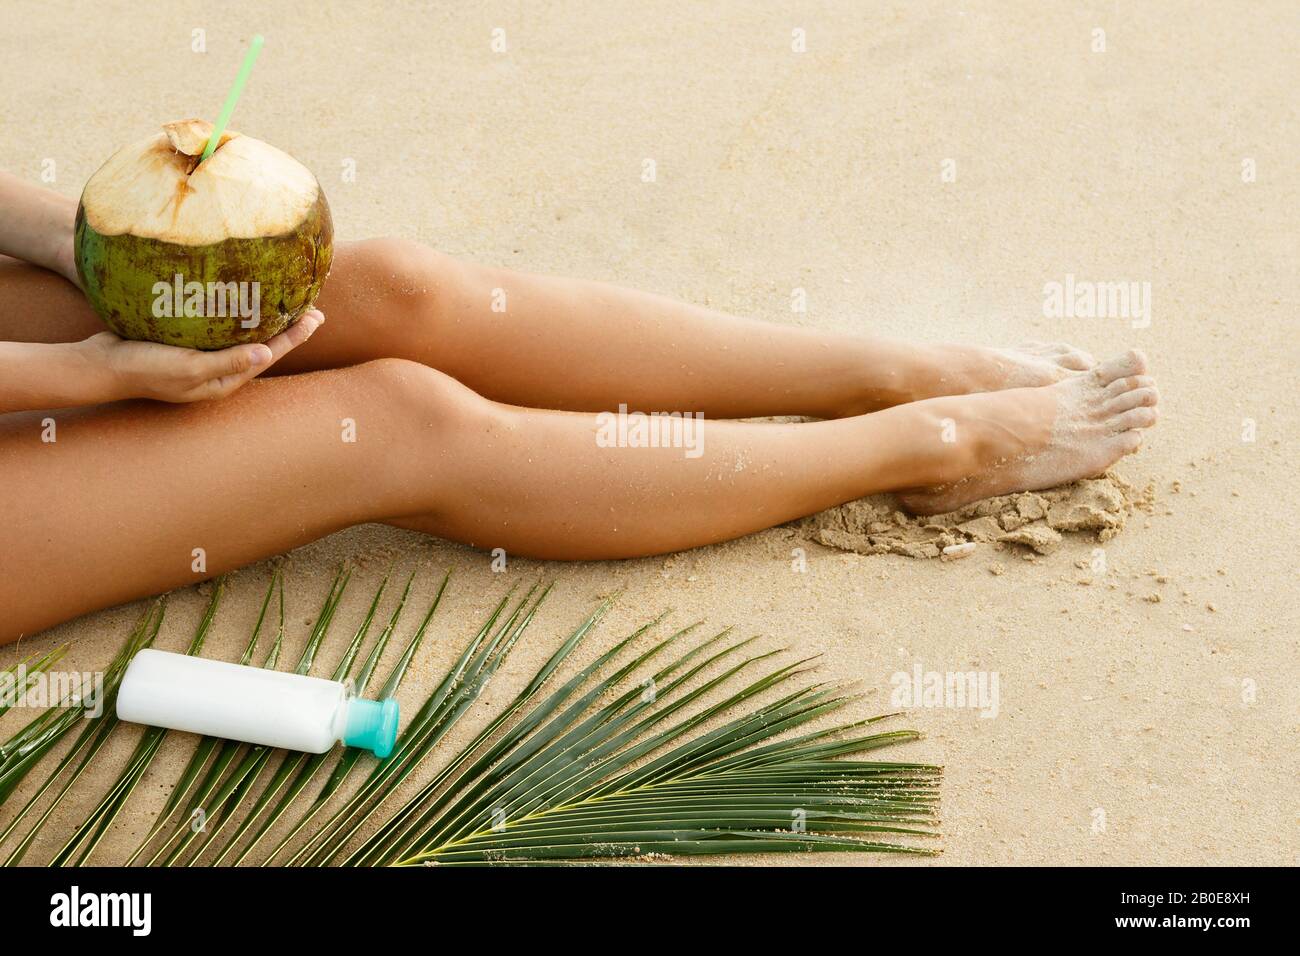 Relaxing on the beach. Female legs, coconut and sunblock lotion. Stock Photo